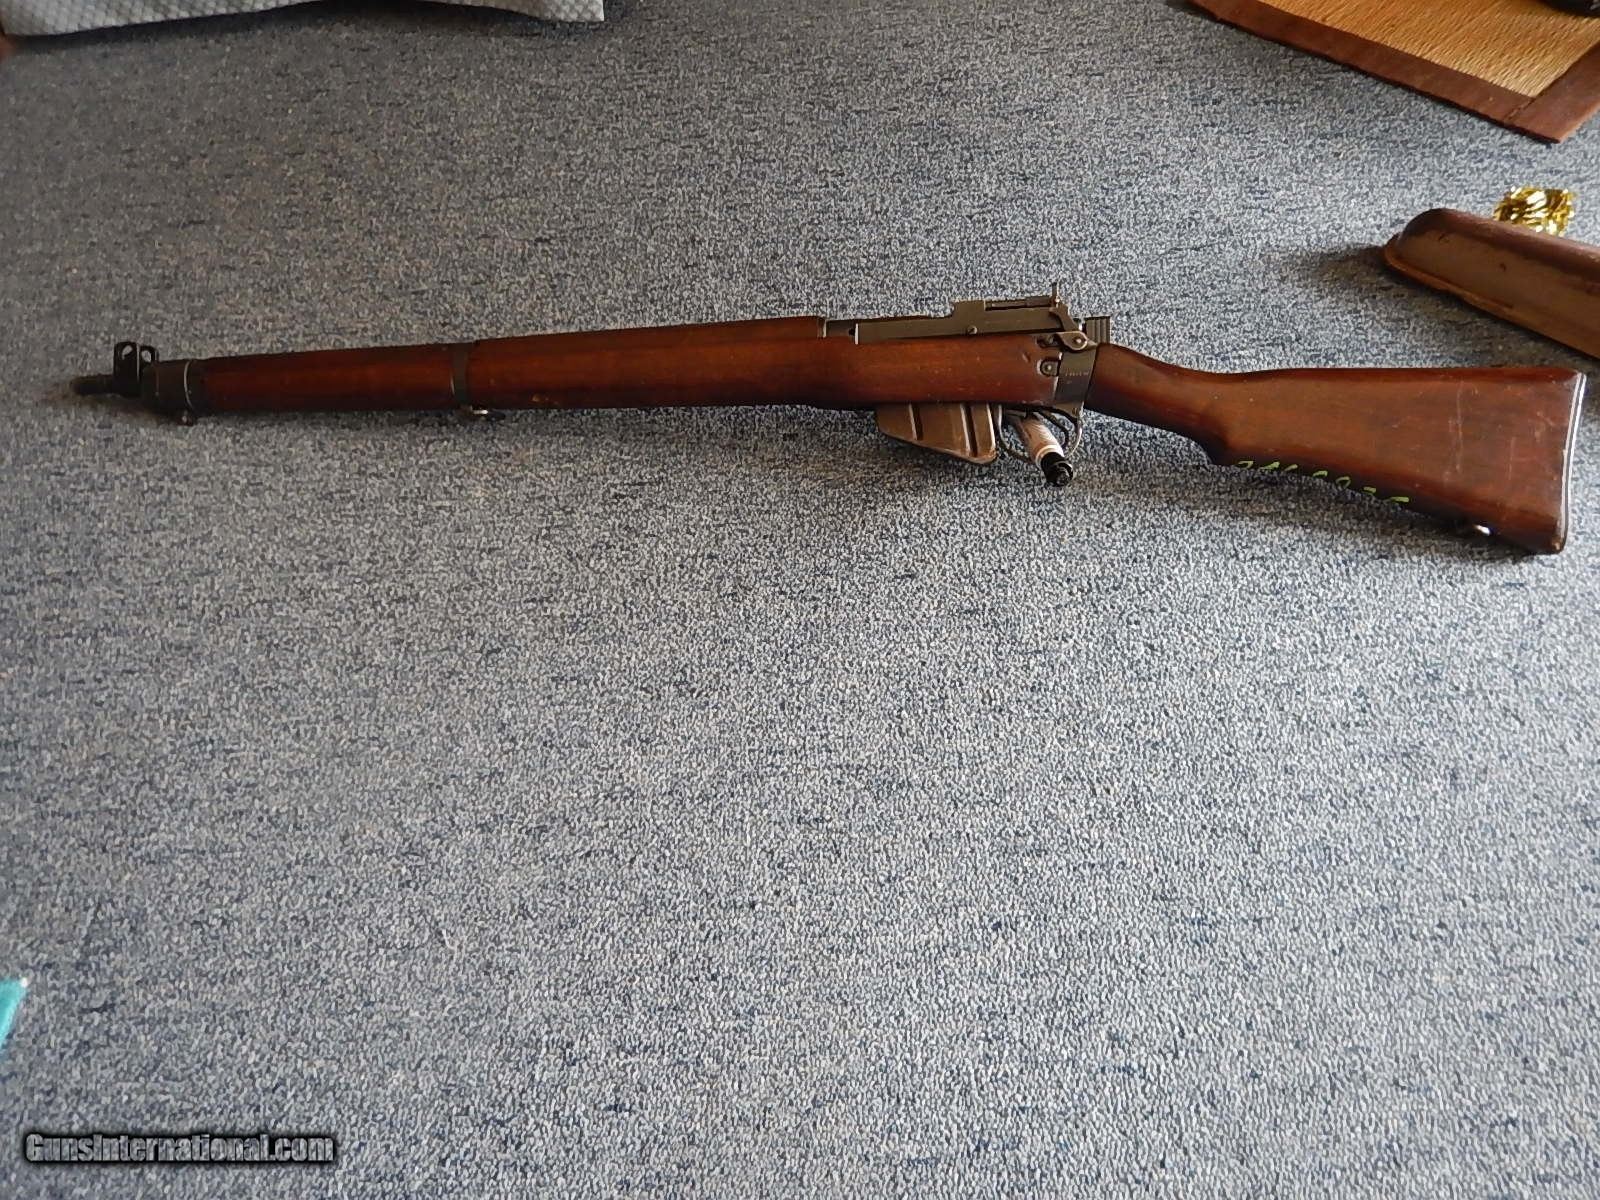 Enfield long Branch No 4 Mk1* 303 Brit Rifle - Baer Auctioneers - Realty,  LLC